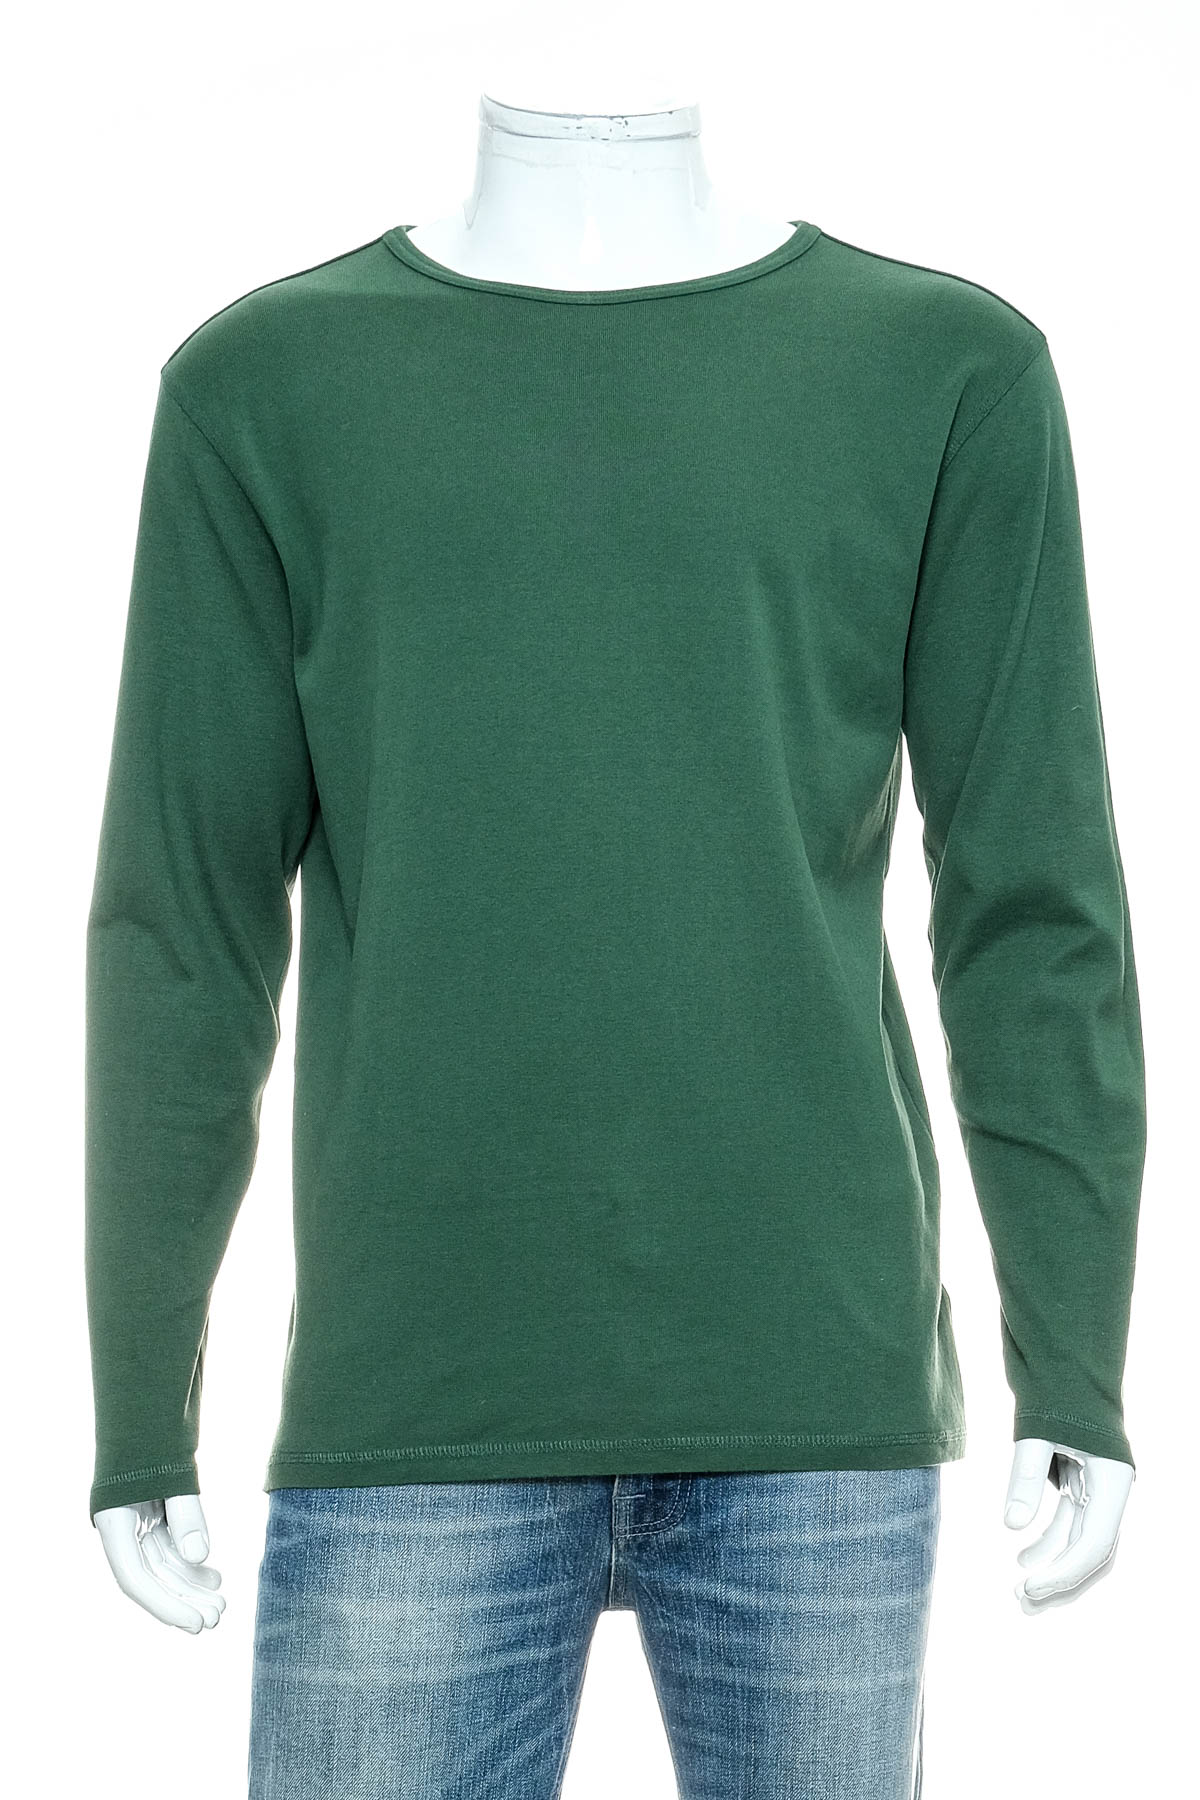 Men's sweater - Southern - 0